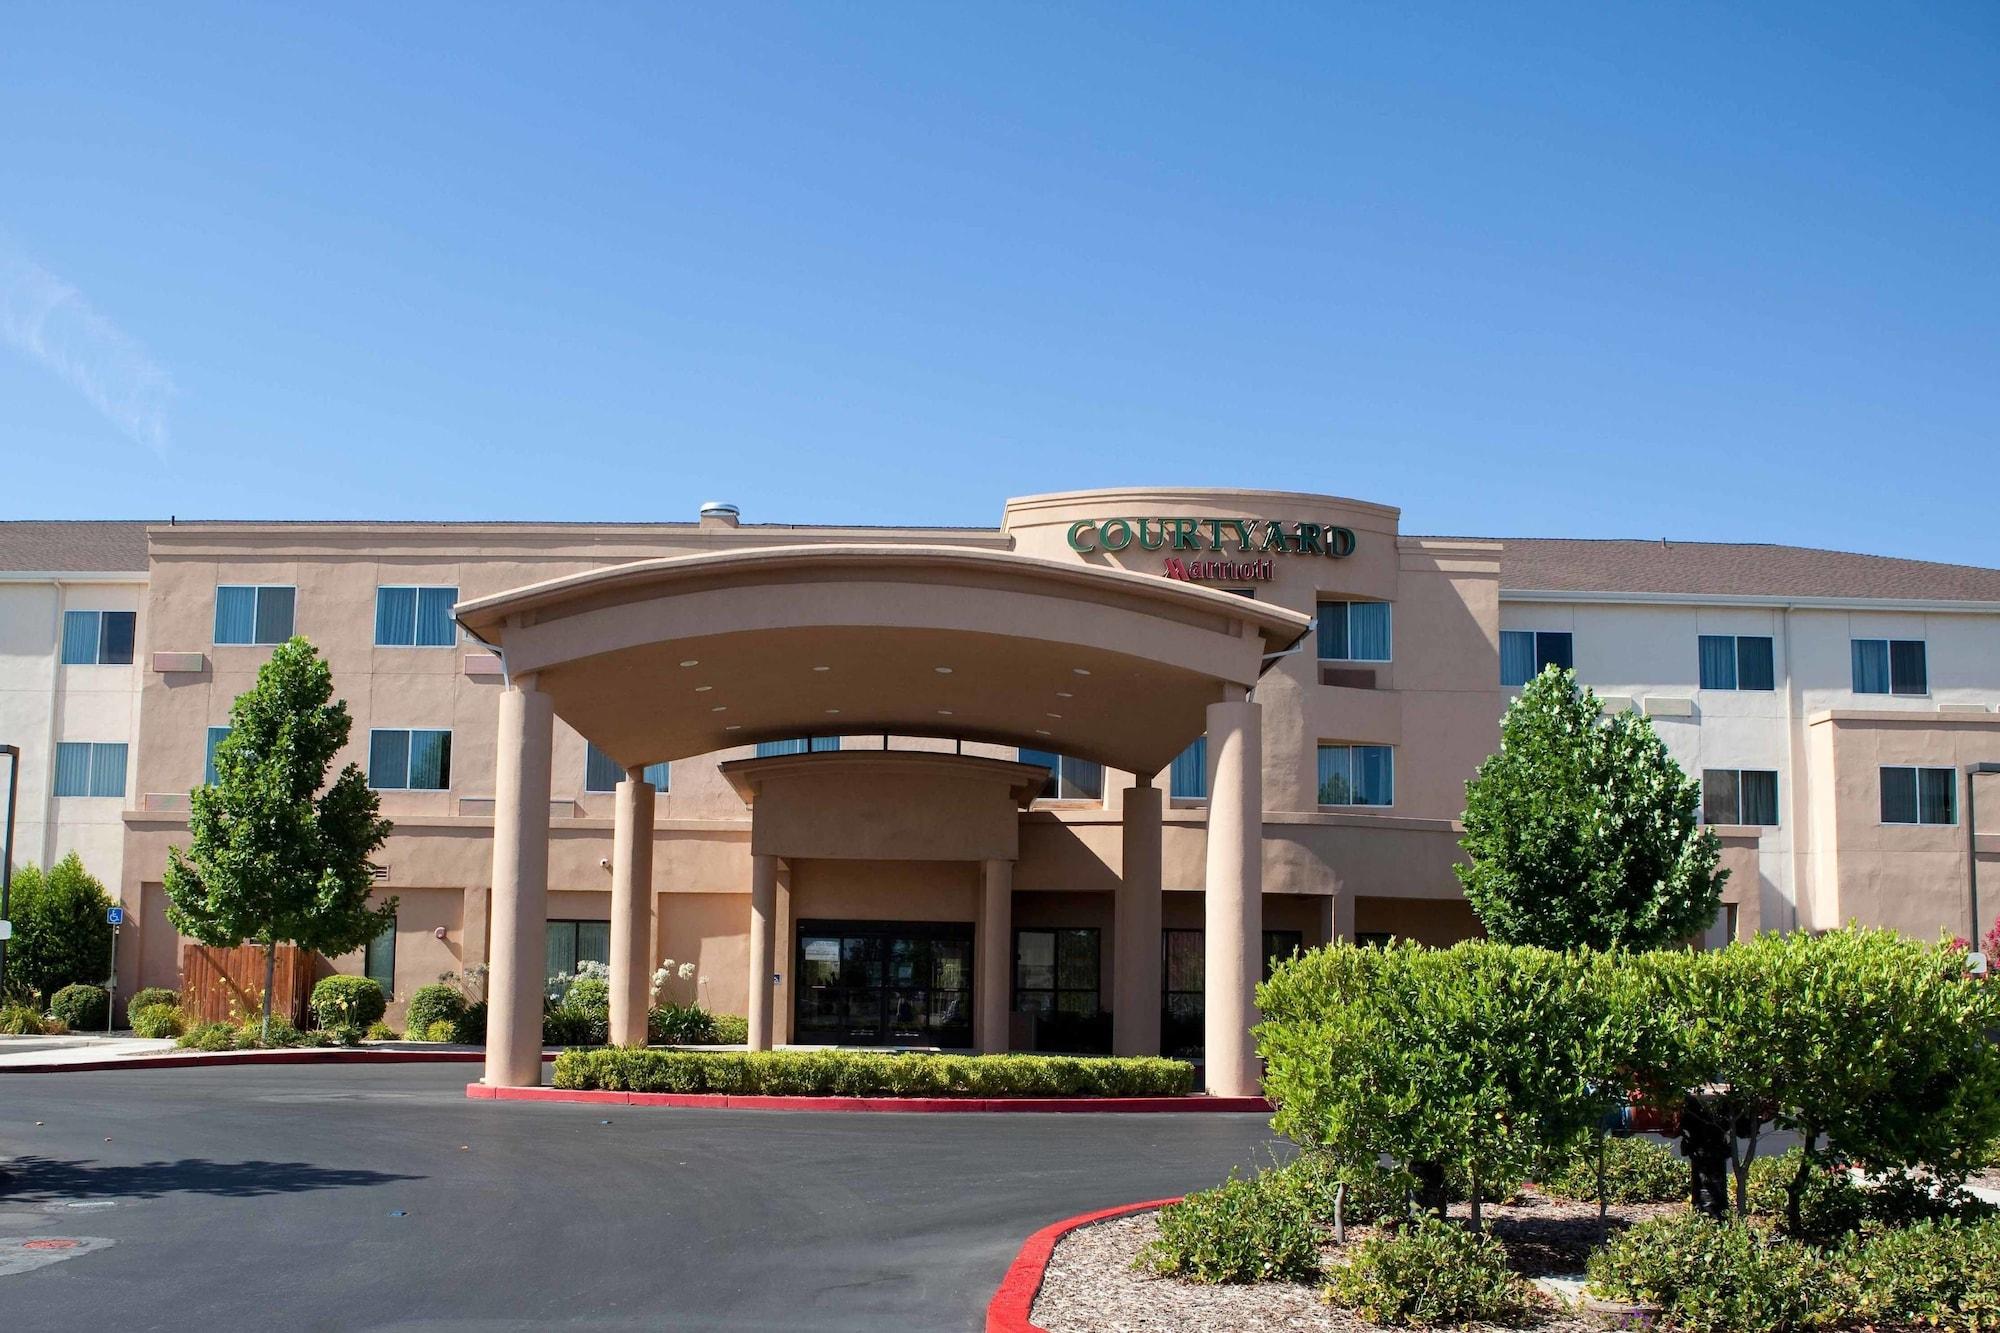 Courtyard by Marriott Chico image